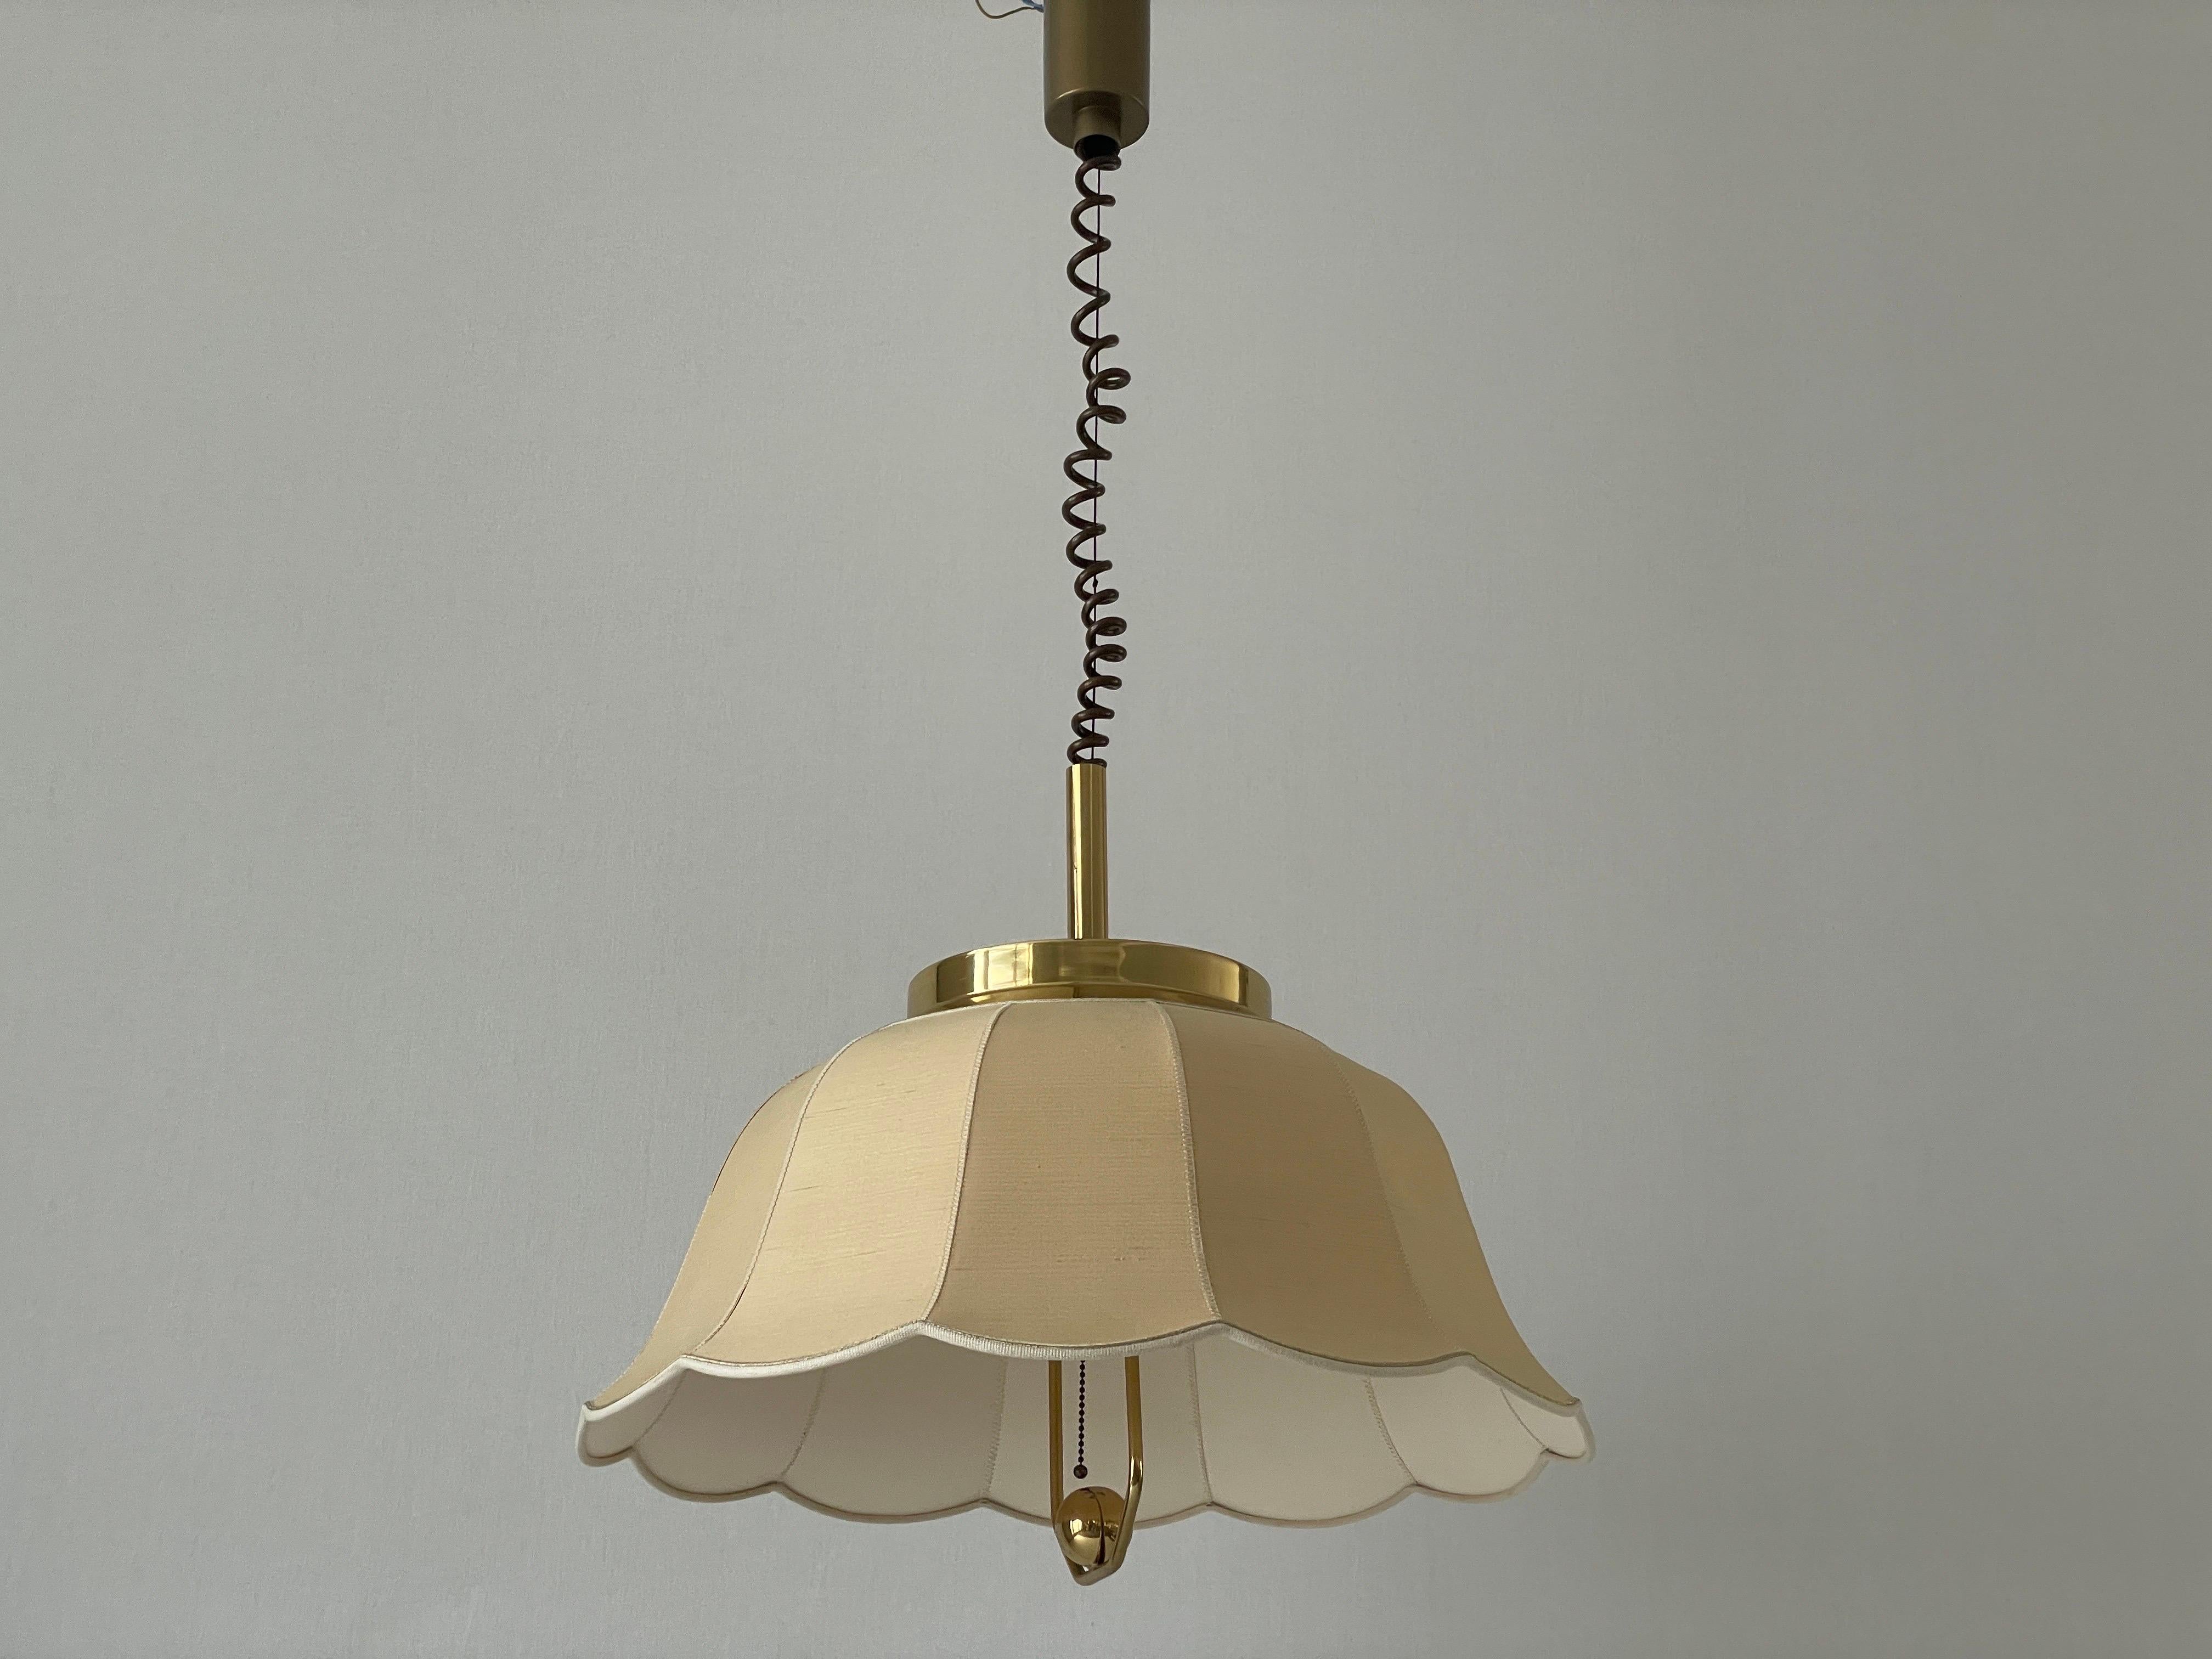 Fabric and Brass 5 socket Adjustable Shade Pendant Lamp by WKR, 1970s, Germany For Sale 3